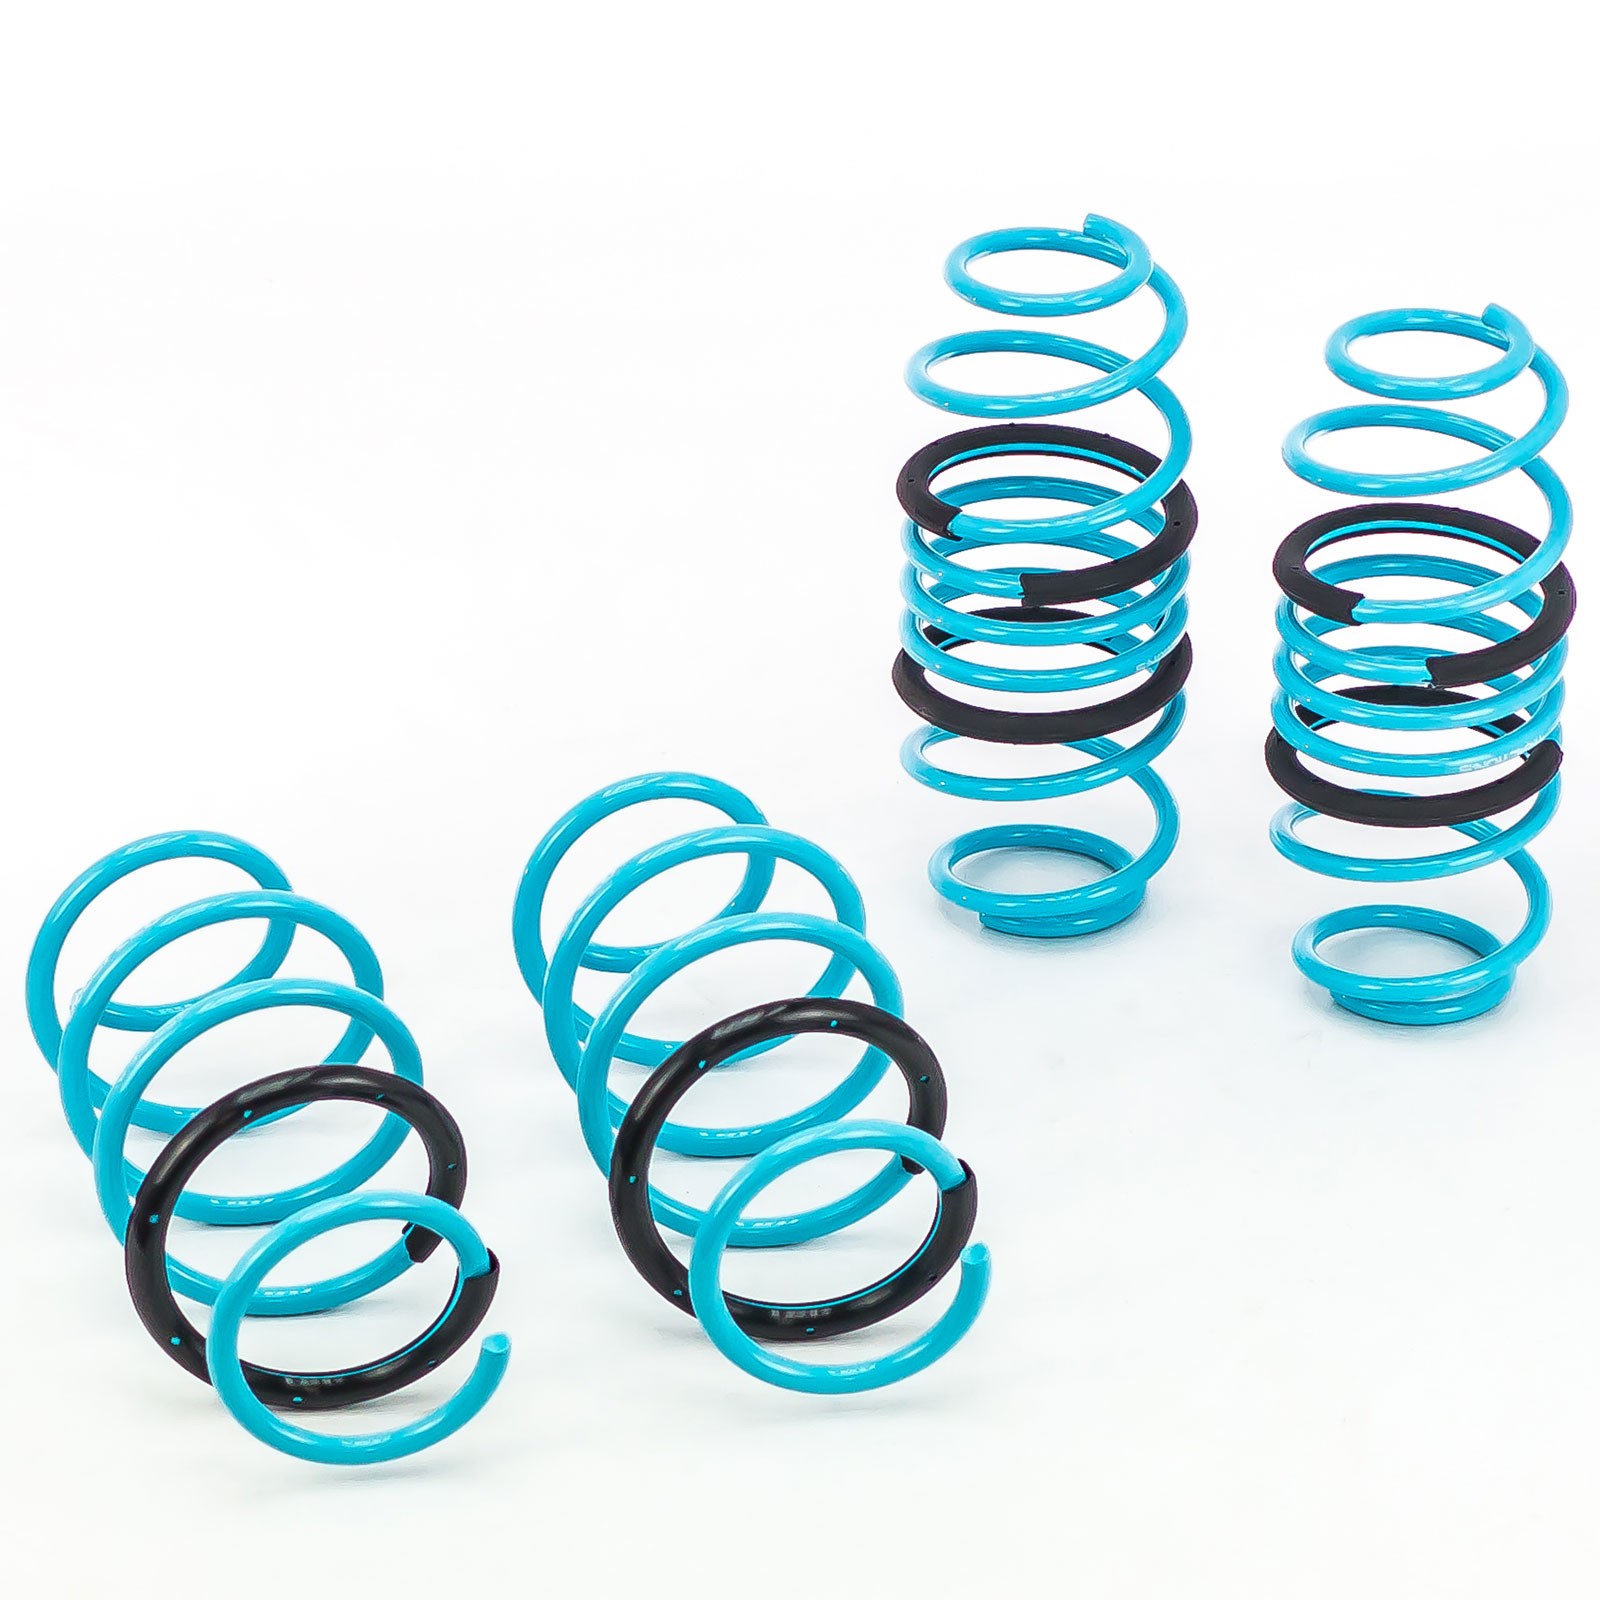 Godspeed Traction-S Lowering Springs For Honda CRV 2012 and up RM1 RM3 RM4